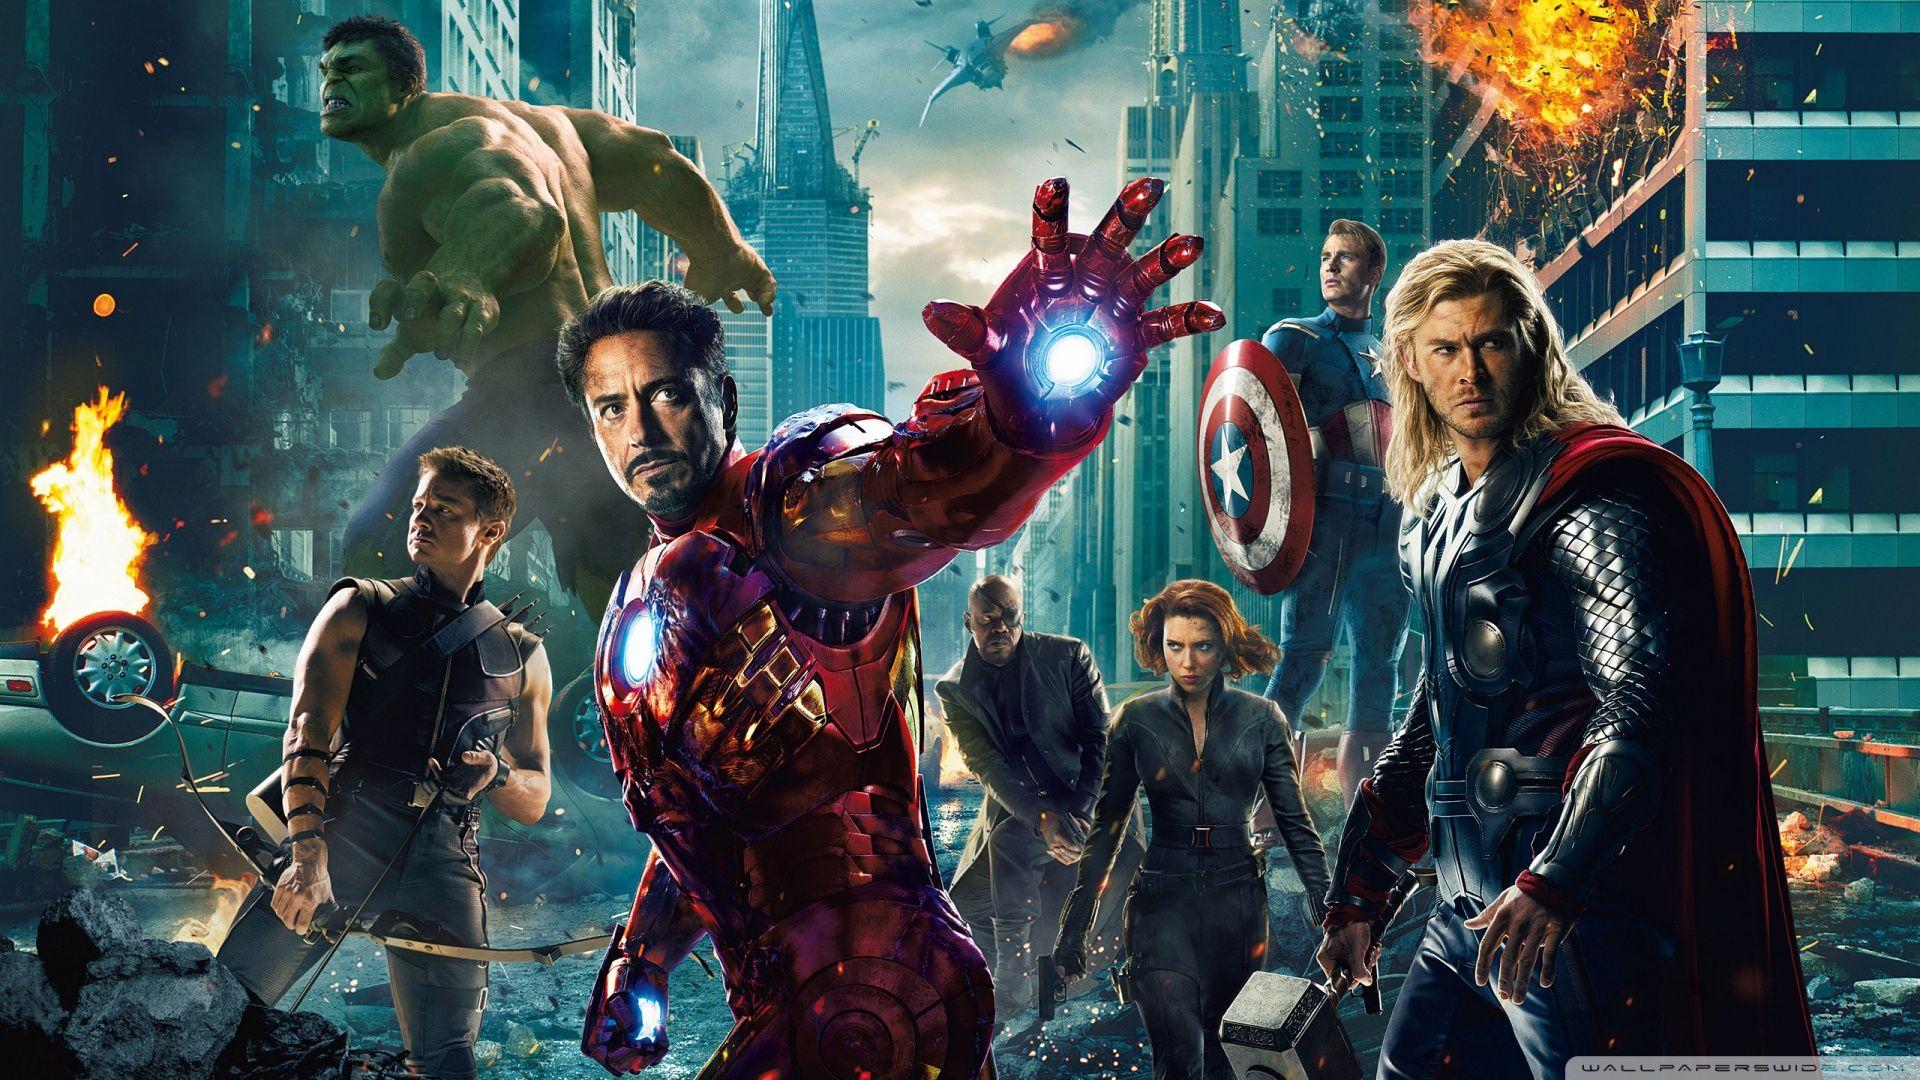 Marvel Live Action Movies Image The Avengers HD Wallpaper